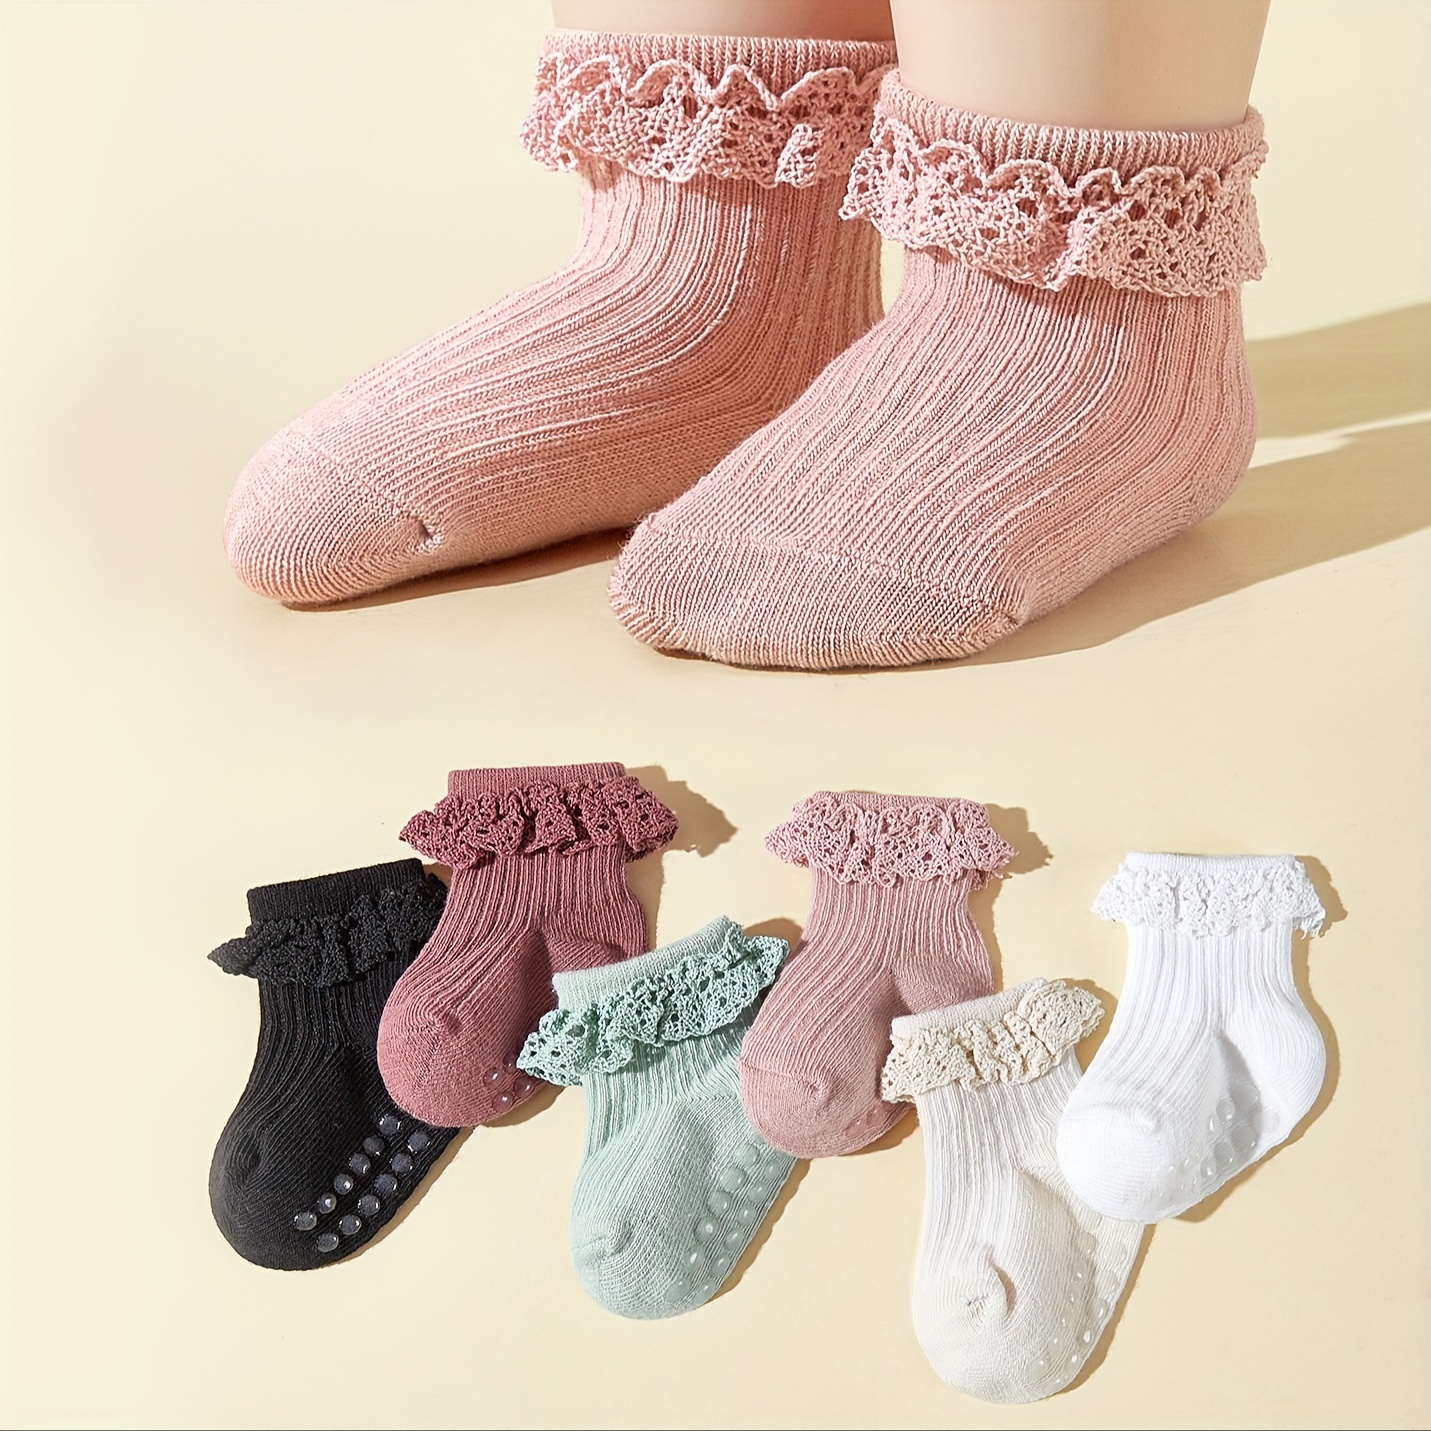 

5 Or 6 Pairs Of Baby Girl's Solid Lace Trim Floor Socks, Anti-skid Cotton Socks With Dot Glue, Toddlers Socks For All Seasons Wearing